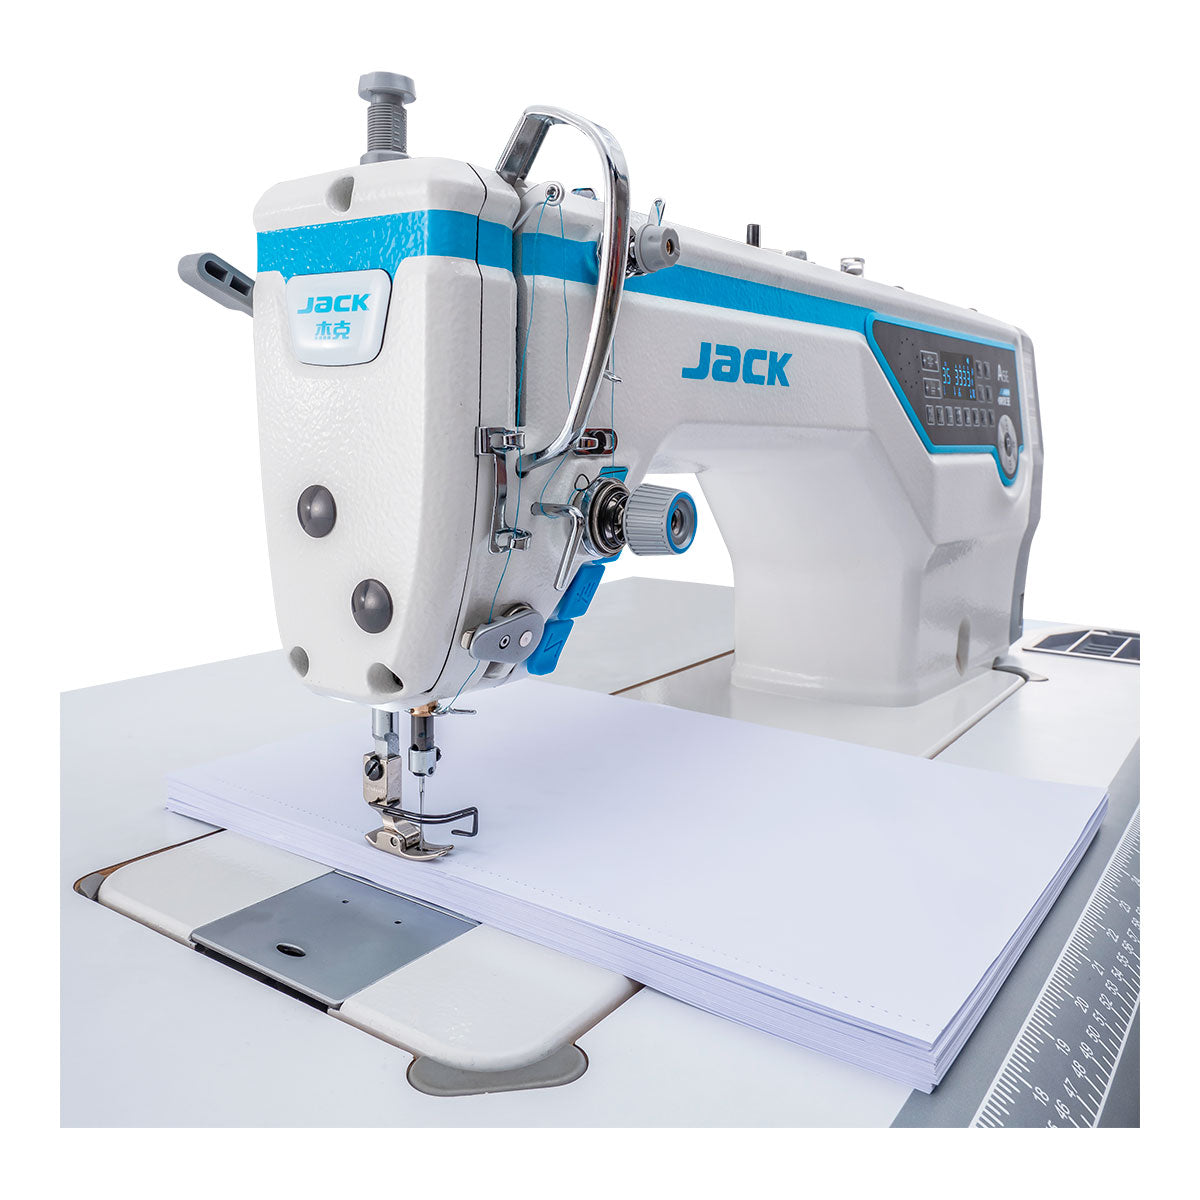 JACK A5E-A (A.M.H) AI Material Recognition Unlock the Potential of All Fabrics Single Needle Direct Drive Fully Automatic Drop Feed Lockstitch Industrial Sewing Machine Complete Assembled with Table and Stand Included